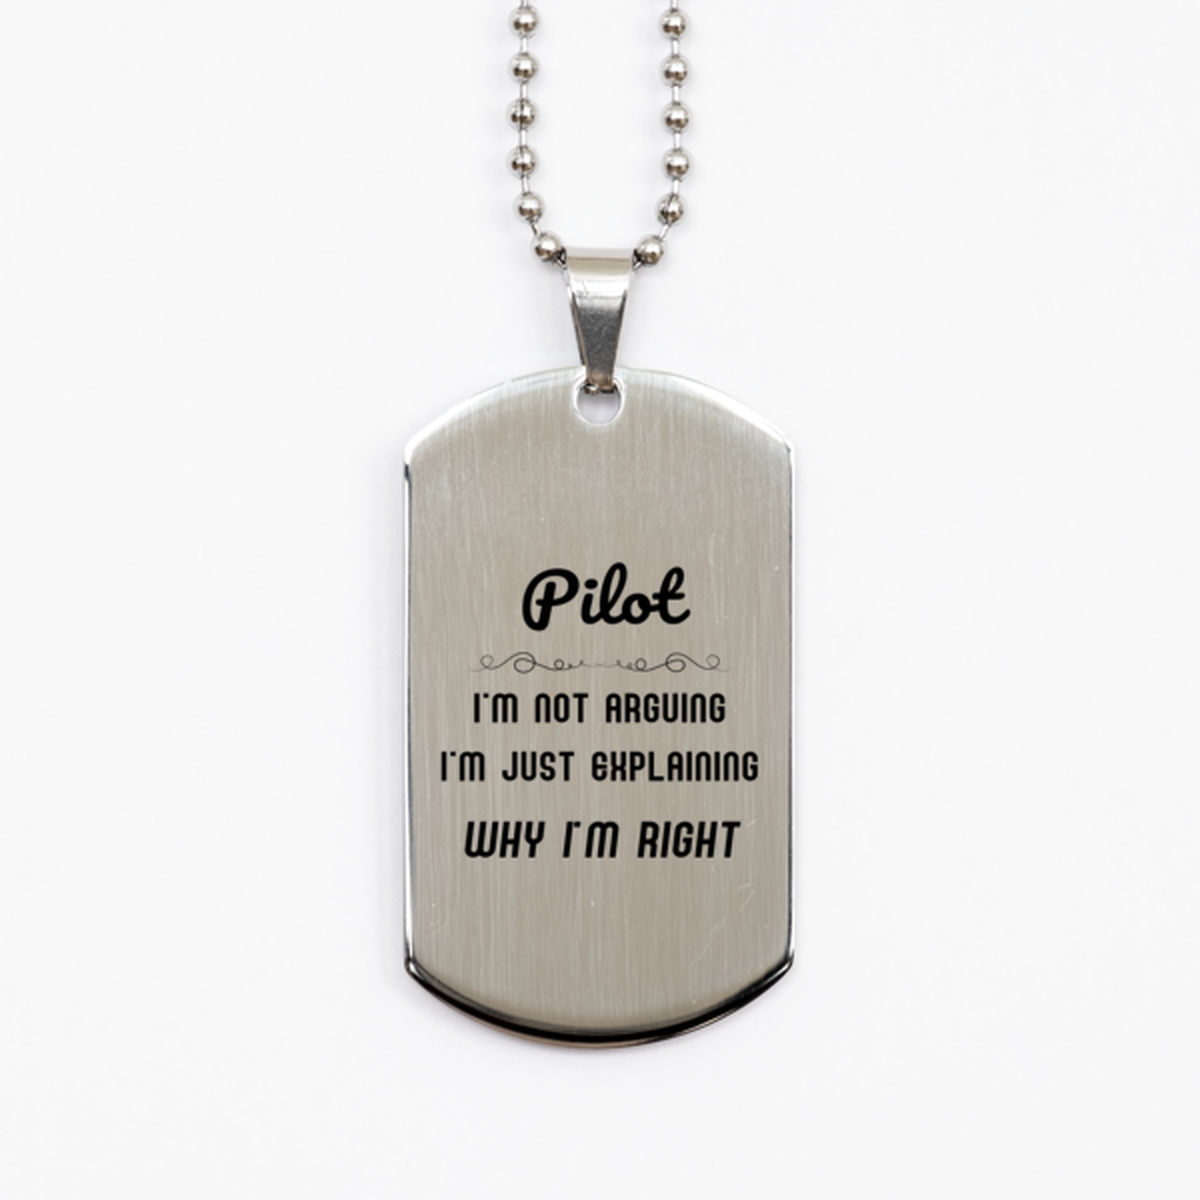 Pilot I'm not Arguing. I'm Just Explaining Why I'm RIGHT Silver Dog Tag, Funny Saying Quote Pilot Gifts For Pilot Graduation Birthday Christmas Gifts for Men Women Coworker